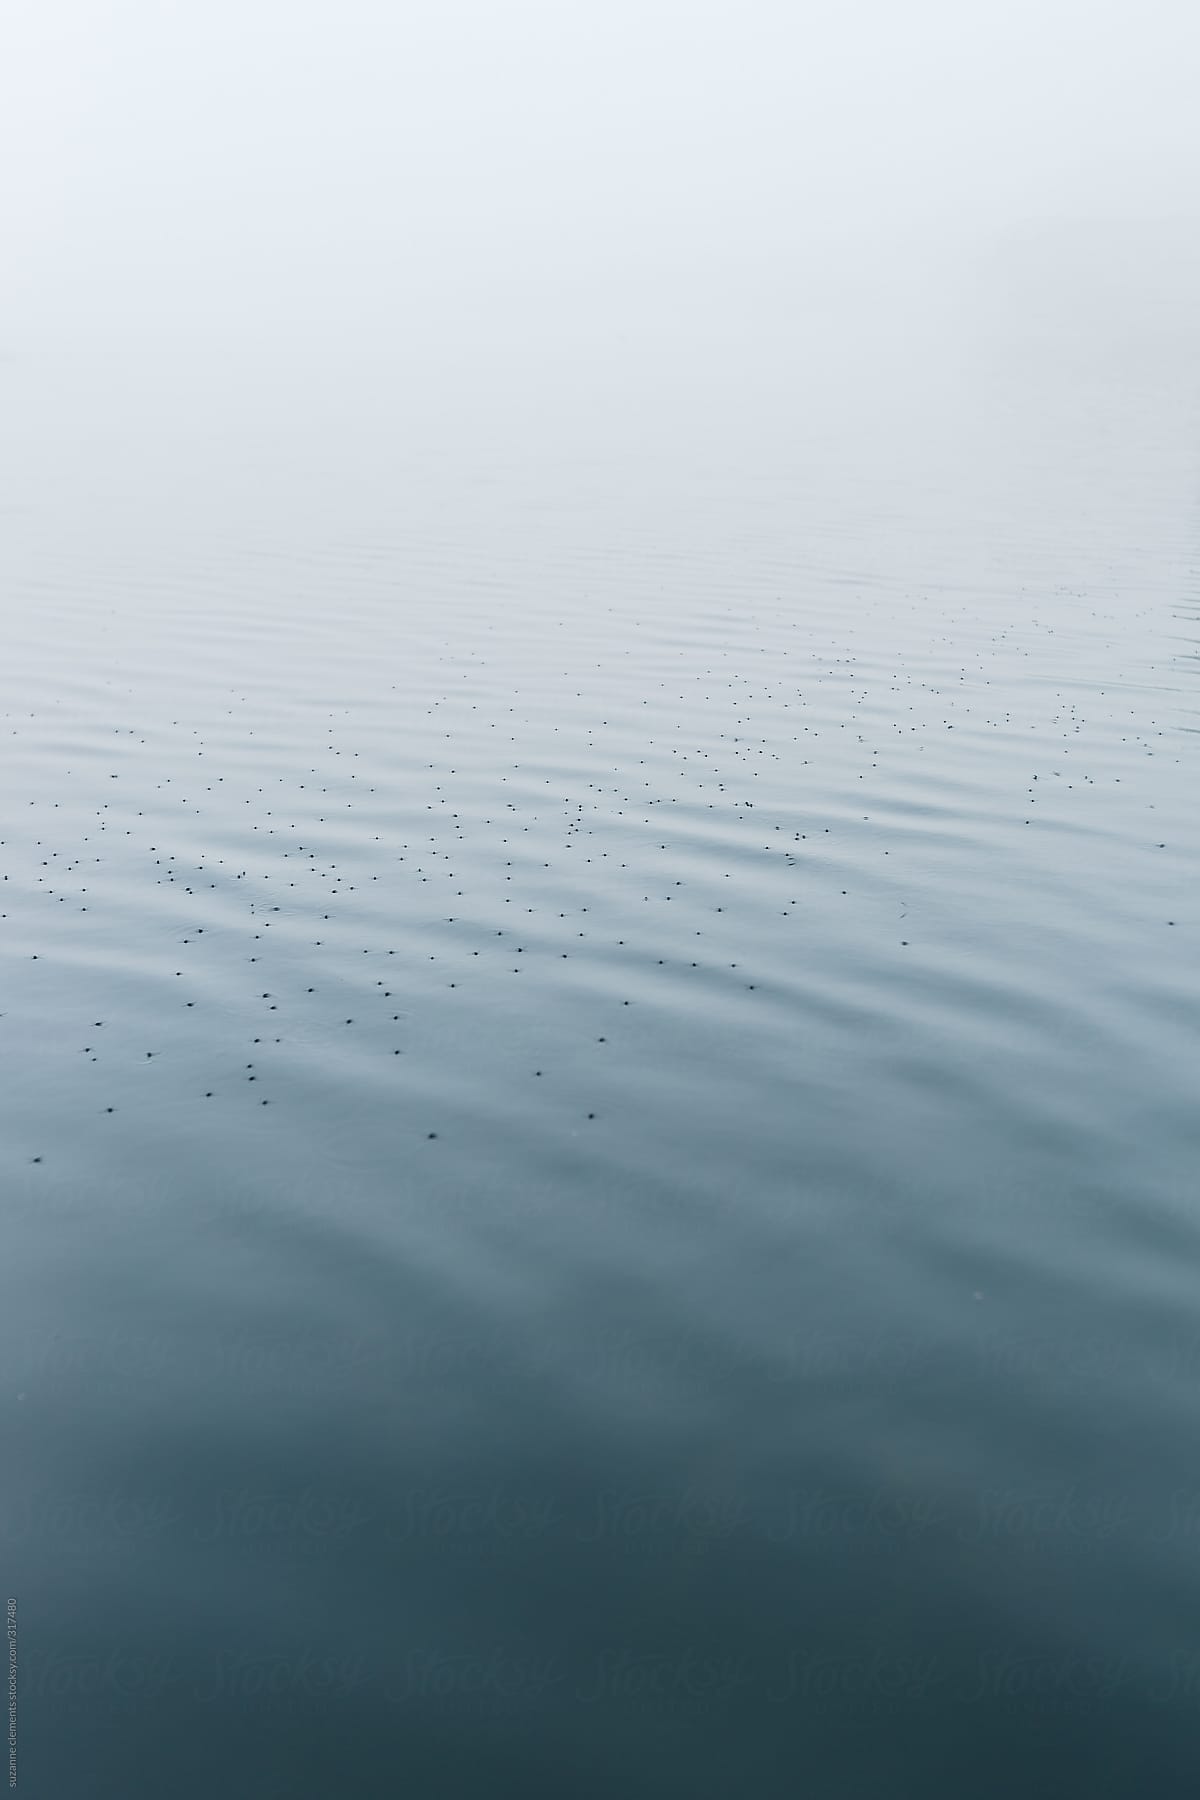 Water Striders Along the Surface of a Still Lake